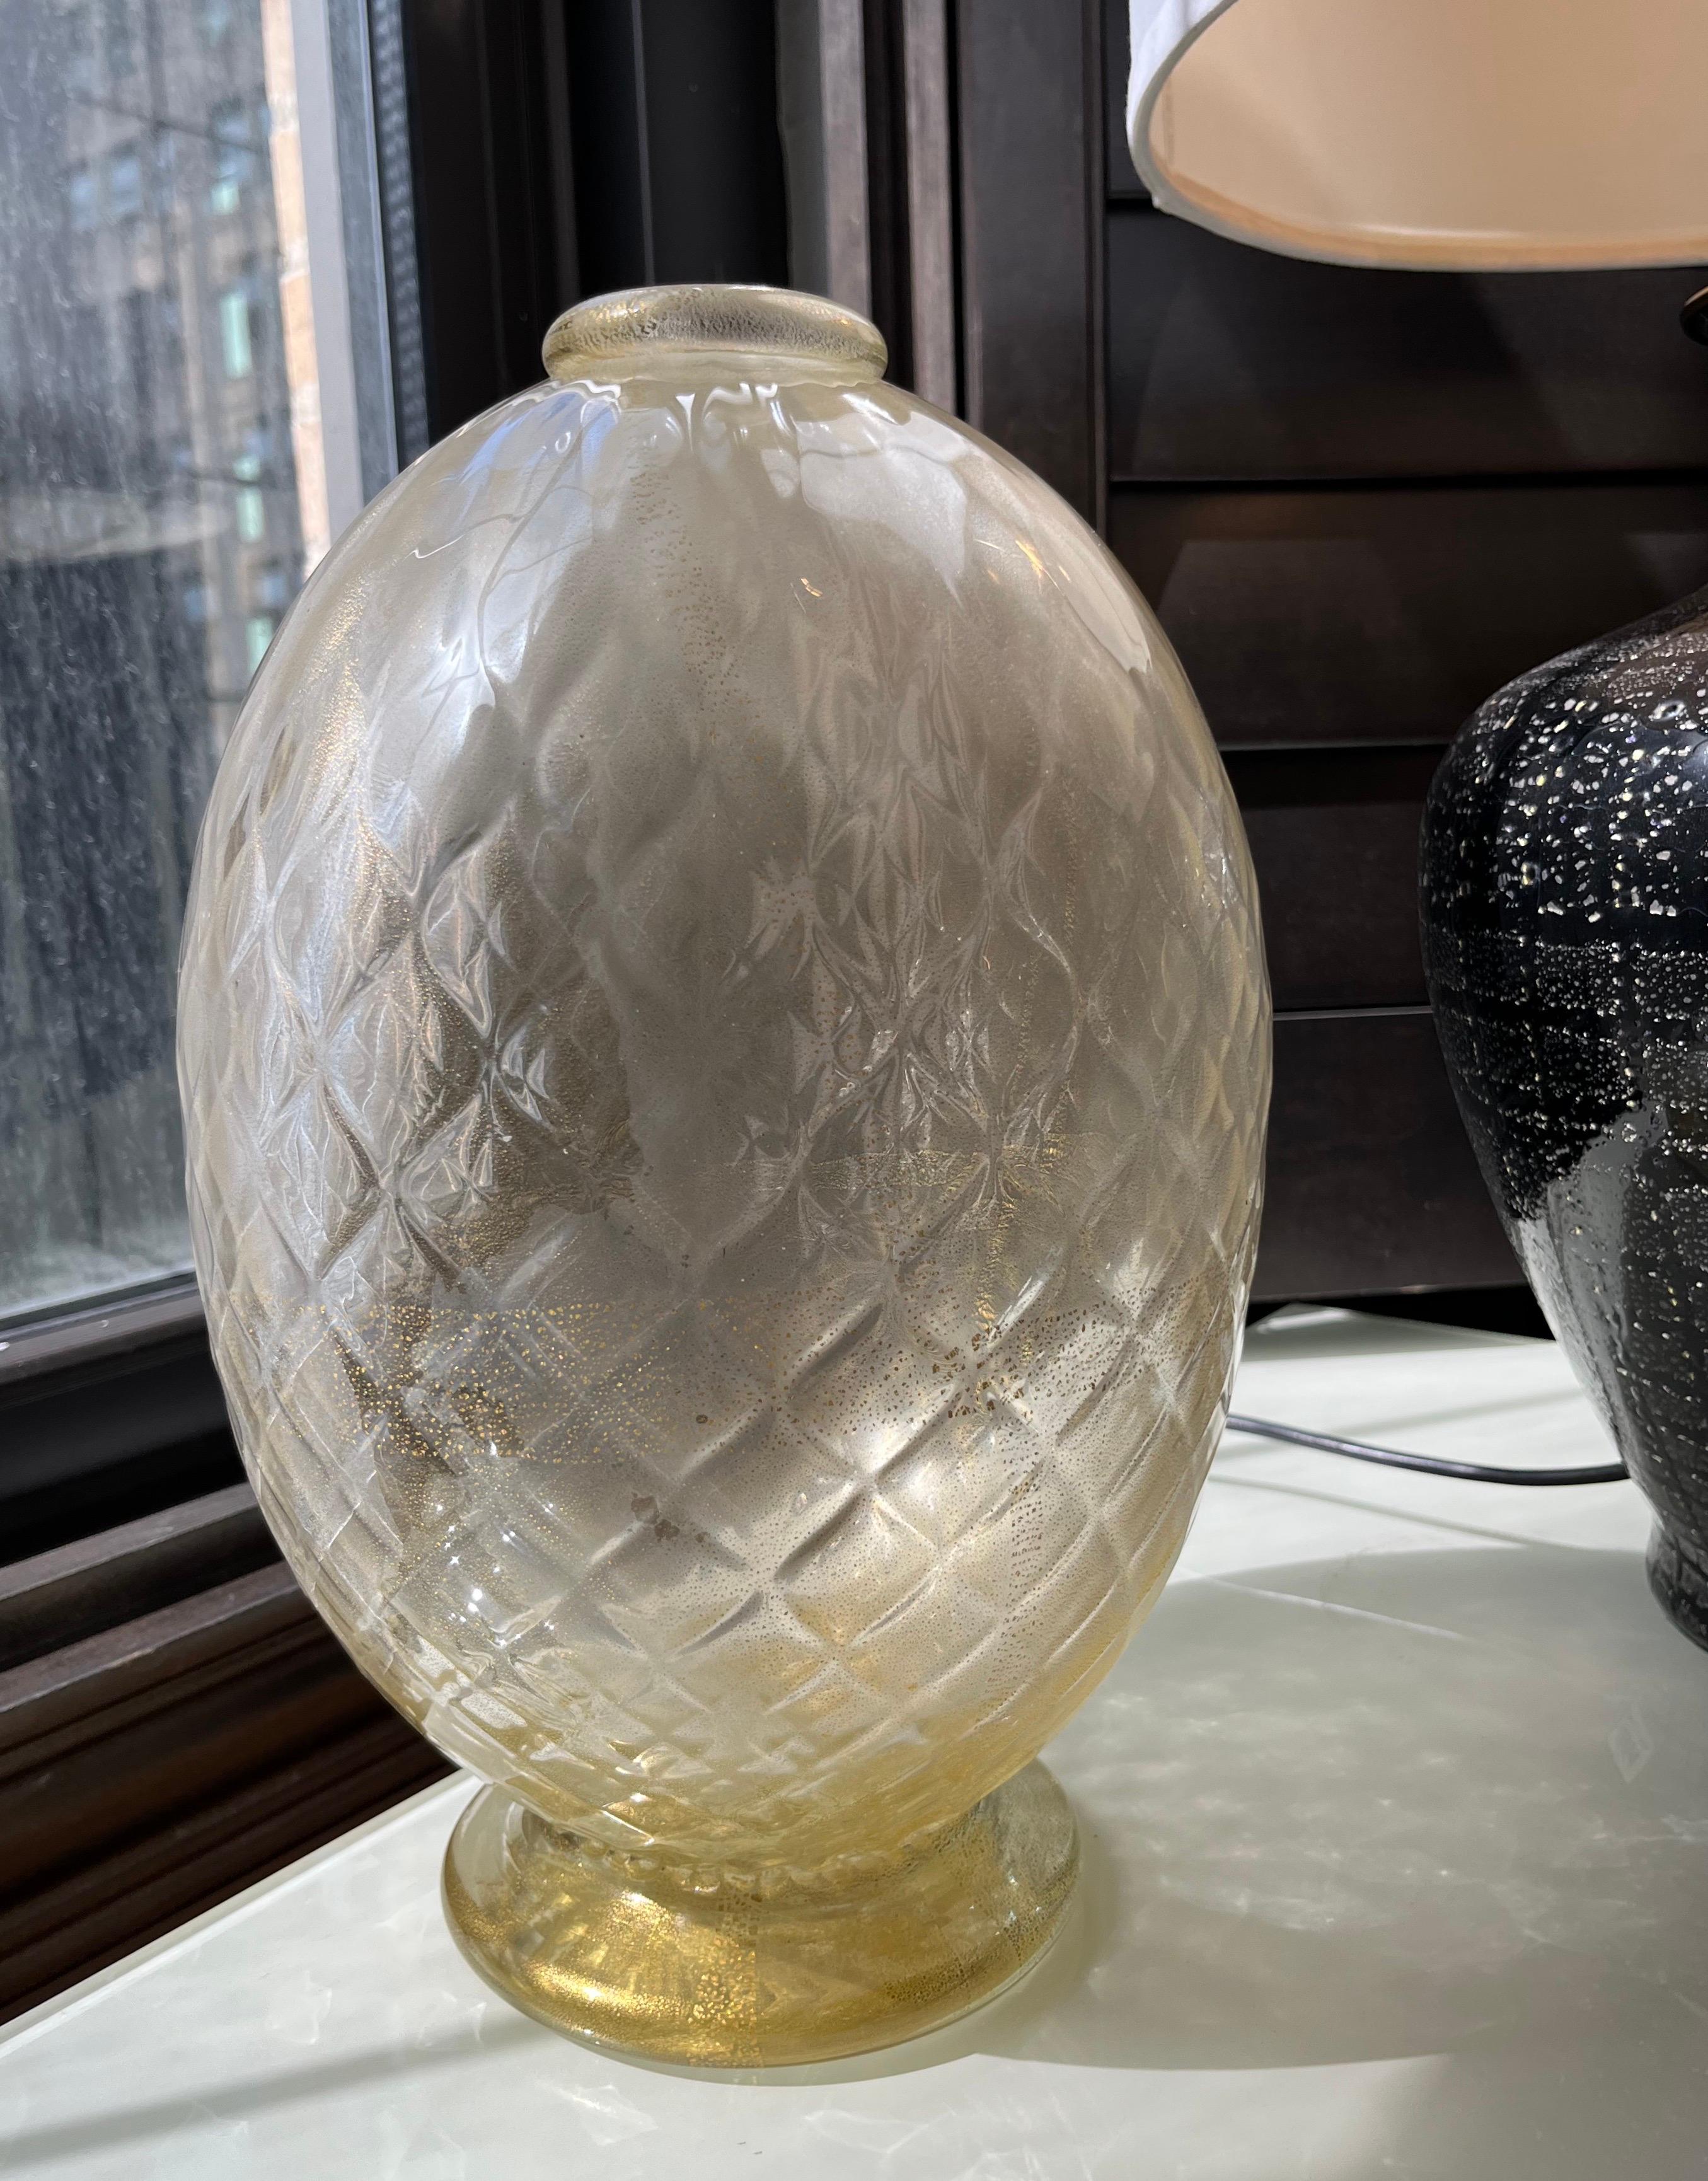 Can also be purchased individually - A set of two Venetian decorative vases, in blown Murano glass, worked with pure 24k gold, the body in a textured glass with a honeycomb pattern that multiplies reflections and enhanced the gold. These are